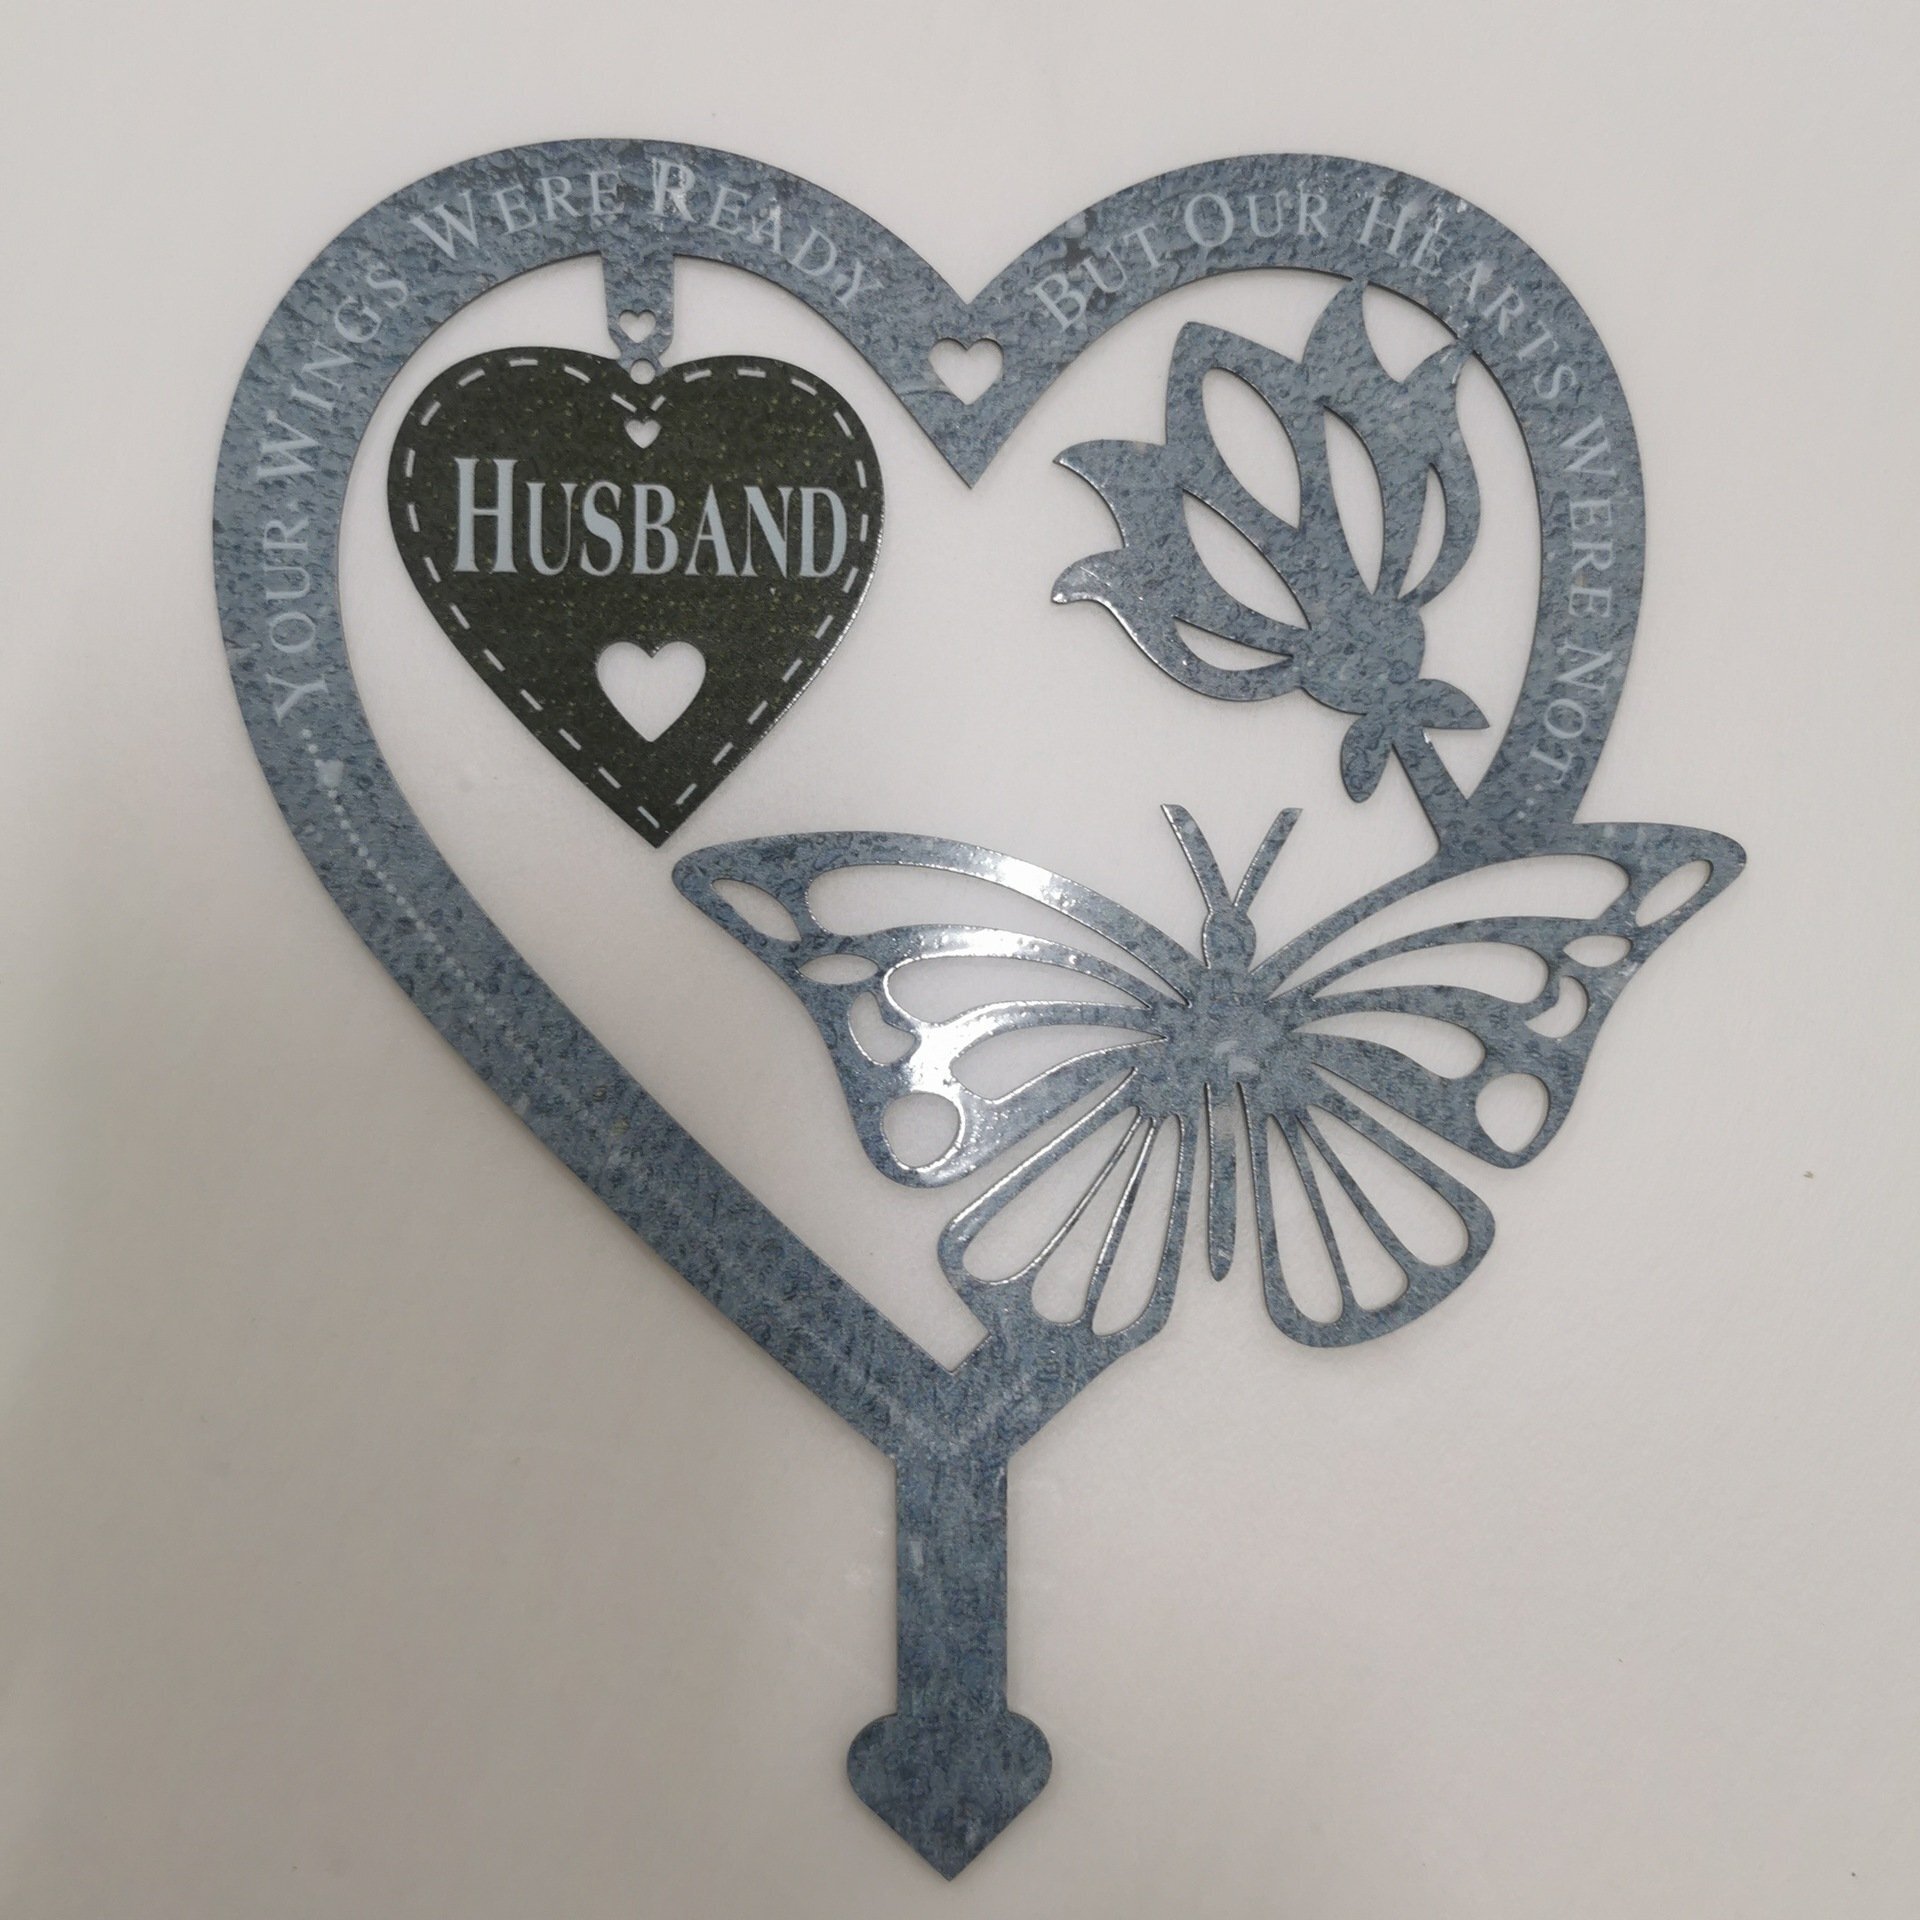 🔥Last Day Promotion - 50% OFF🔥 - Memorial Gift Butterfly Ornament-Garden Memorial Plaque ( 🔥BUY 2 GET FREE SHIPPING )